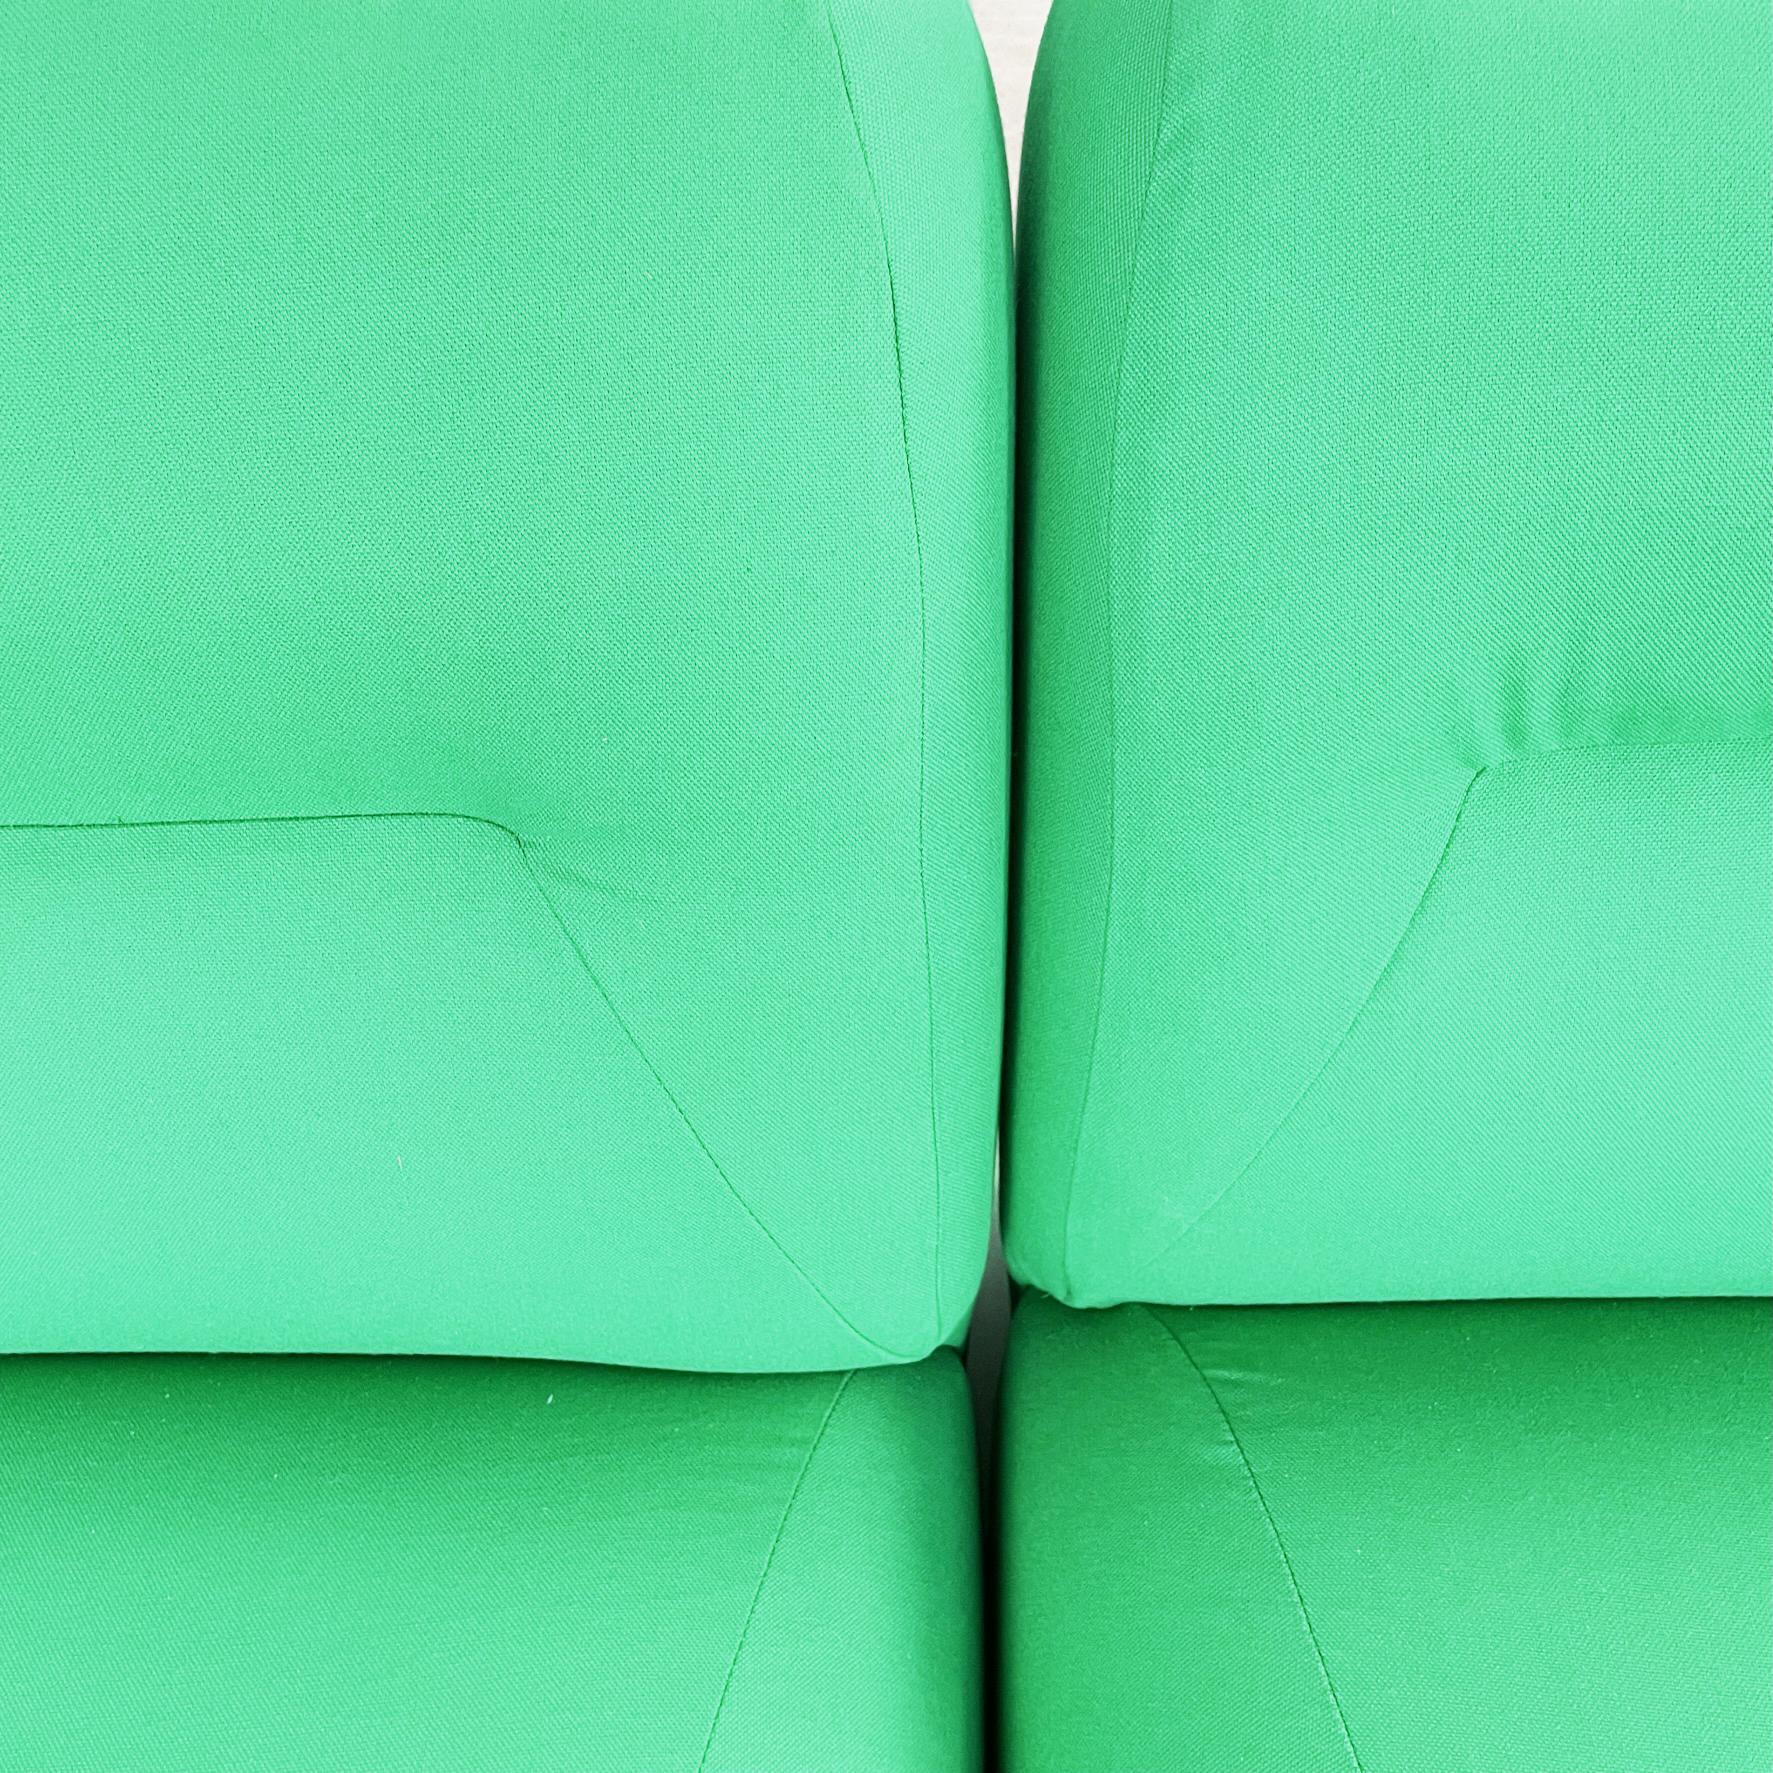 Italian Space Age Modular Sofa in Green Fabric with Metal Insert, 1970s For Sale 9